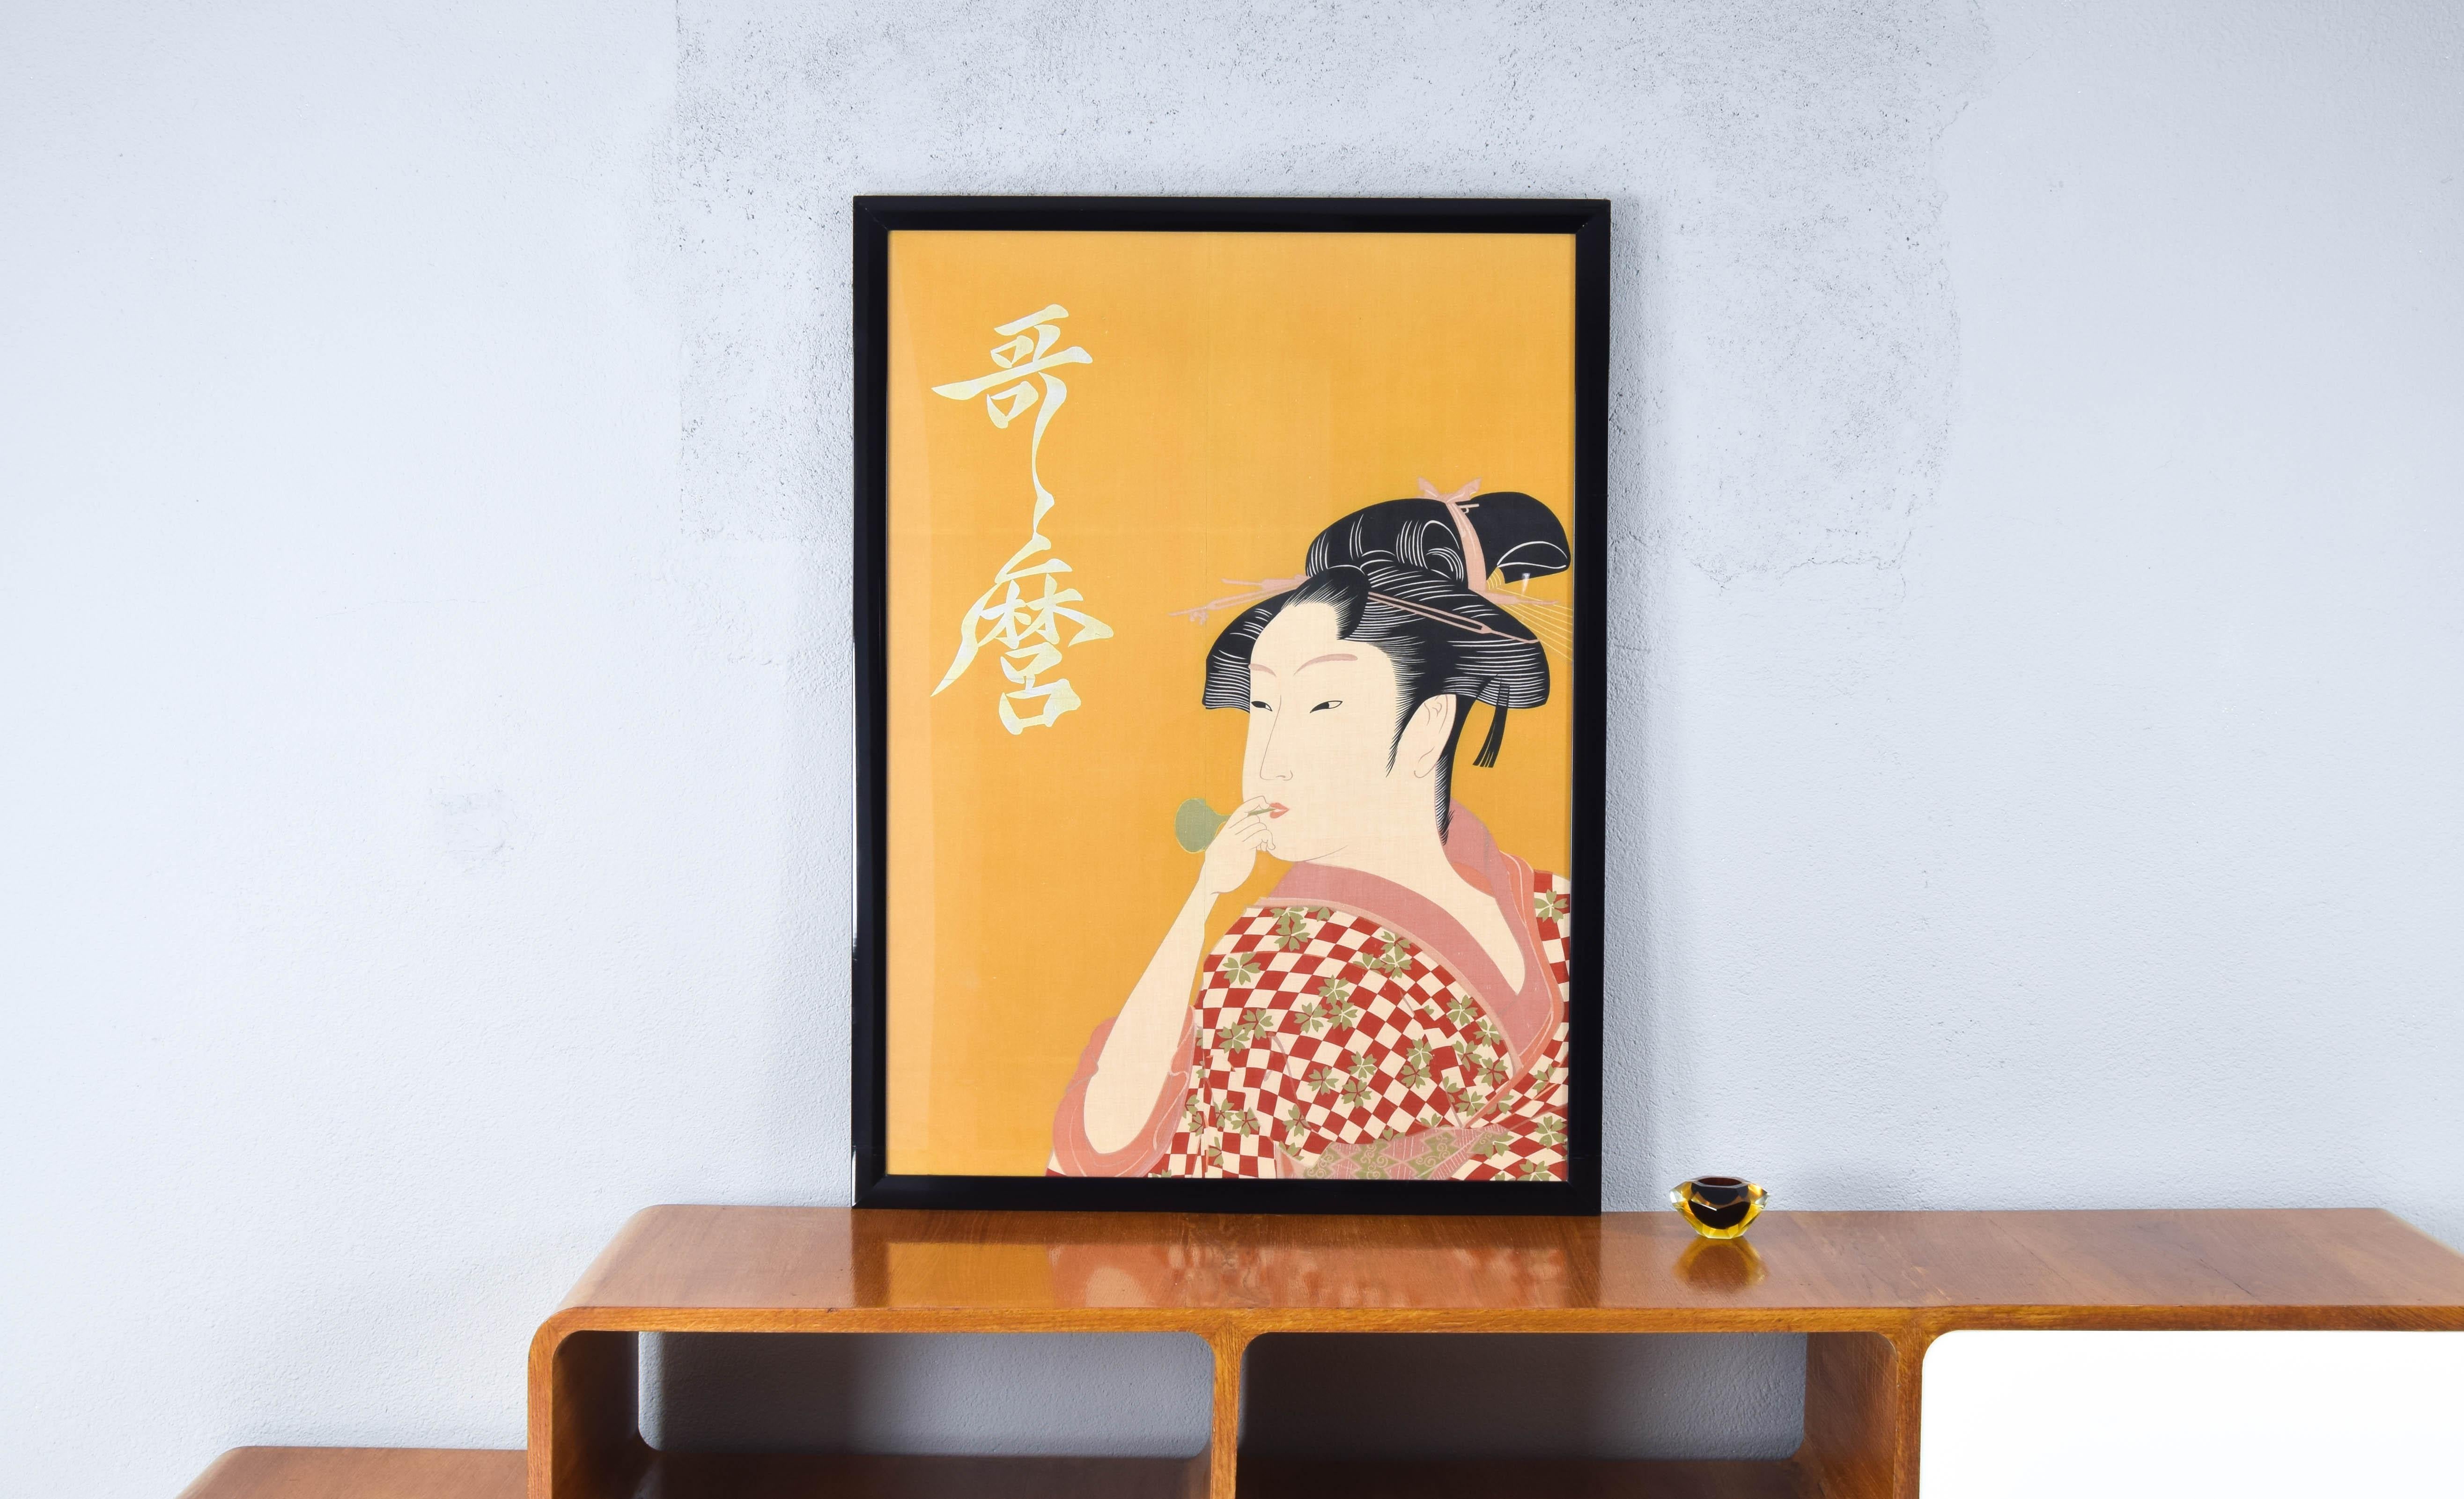 Unknown Large Midcentury Canvas Inspired by the Image of Utamaro Woman Playing a Poppin